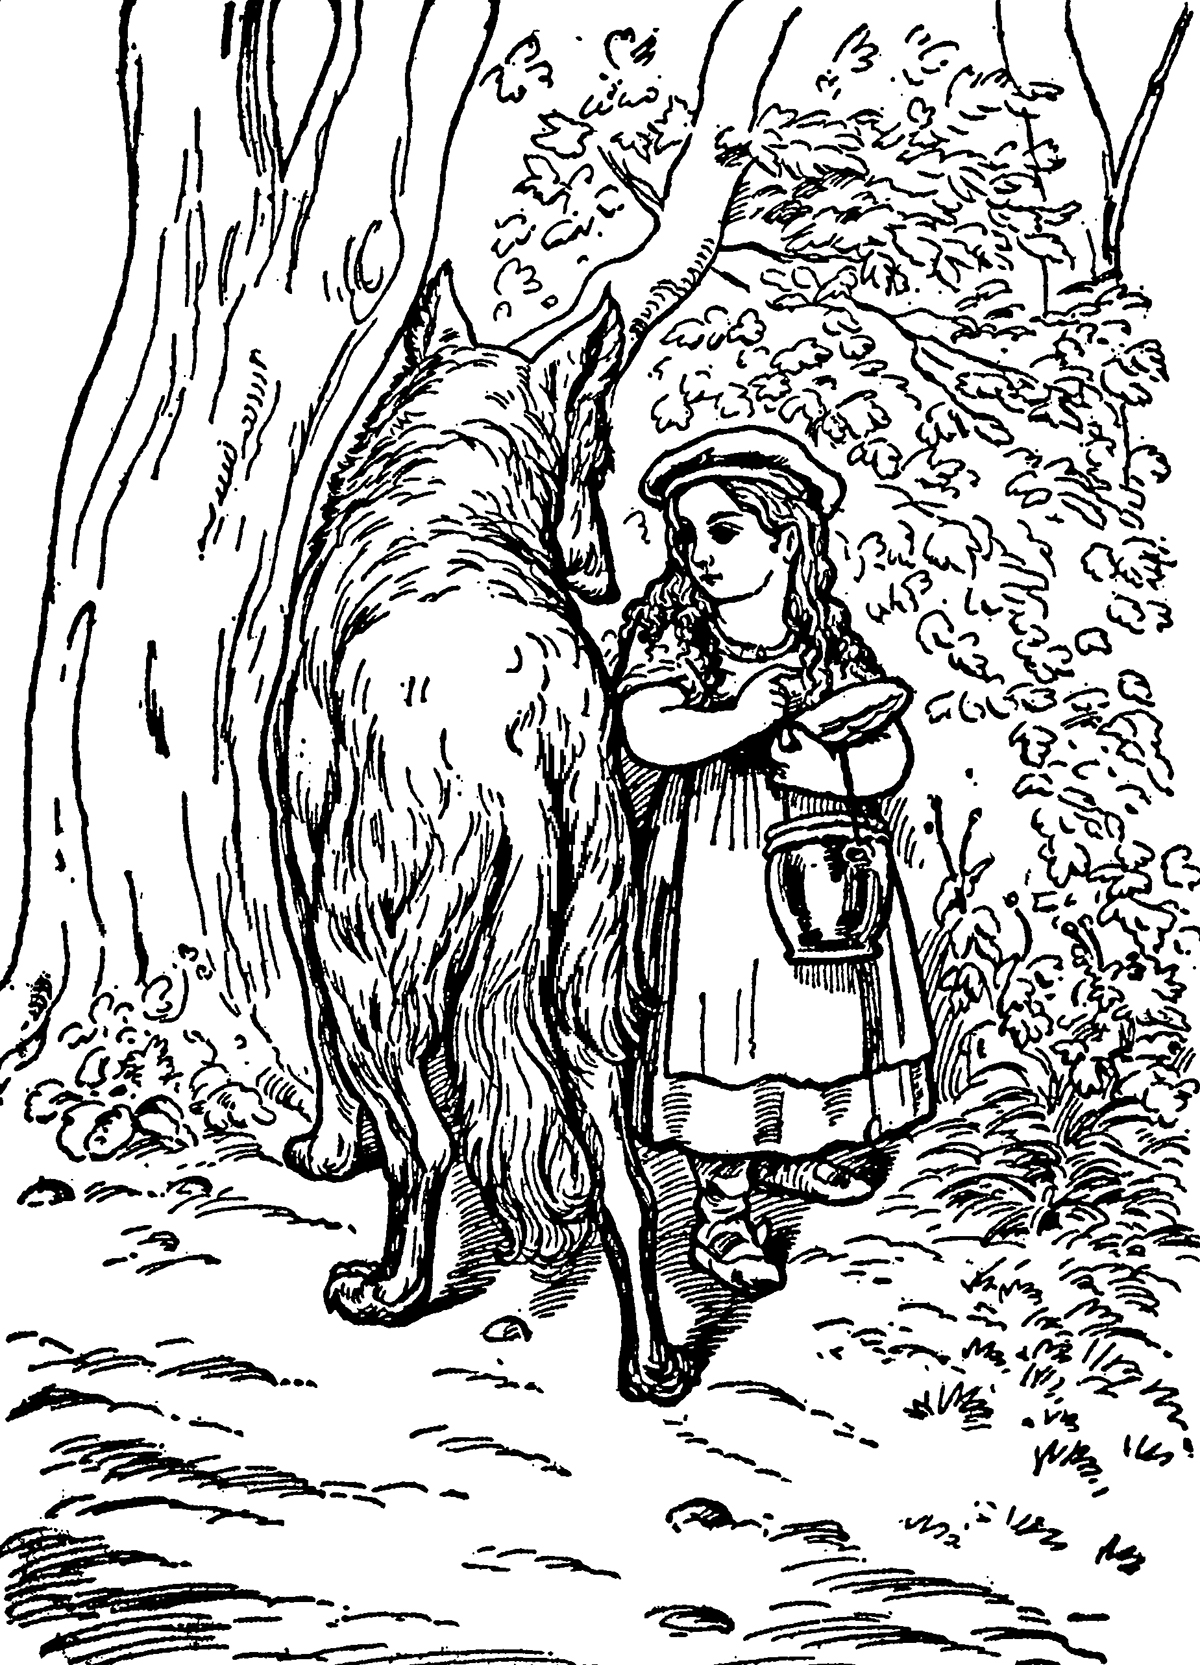 Little Red Riding Hood, The Tales of Mother Goose illustrated by D. J. Munro